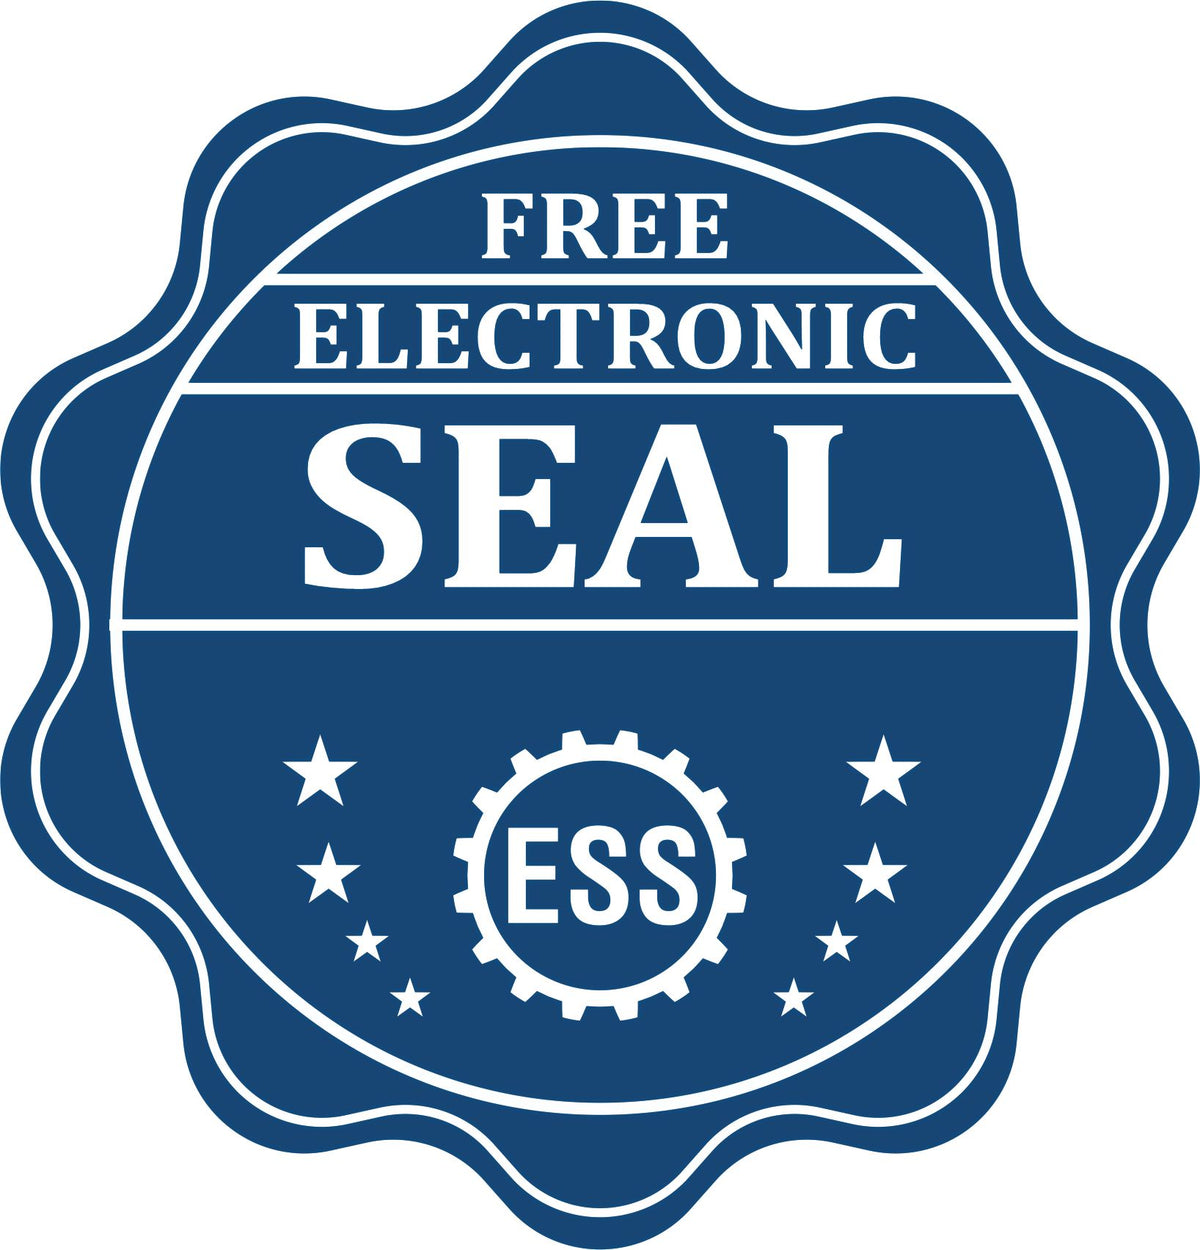 A badge showing a free electronic seal for the Hybrid Missouri Geologist Seal with stars and the ESS gear on the emblem.